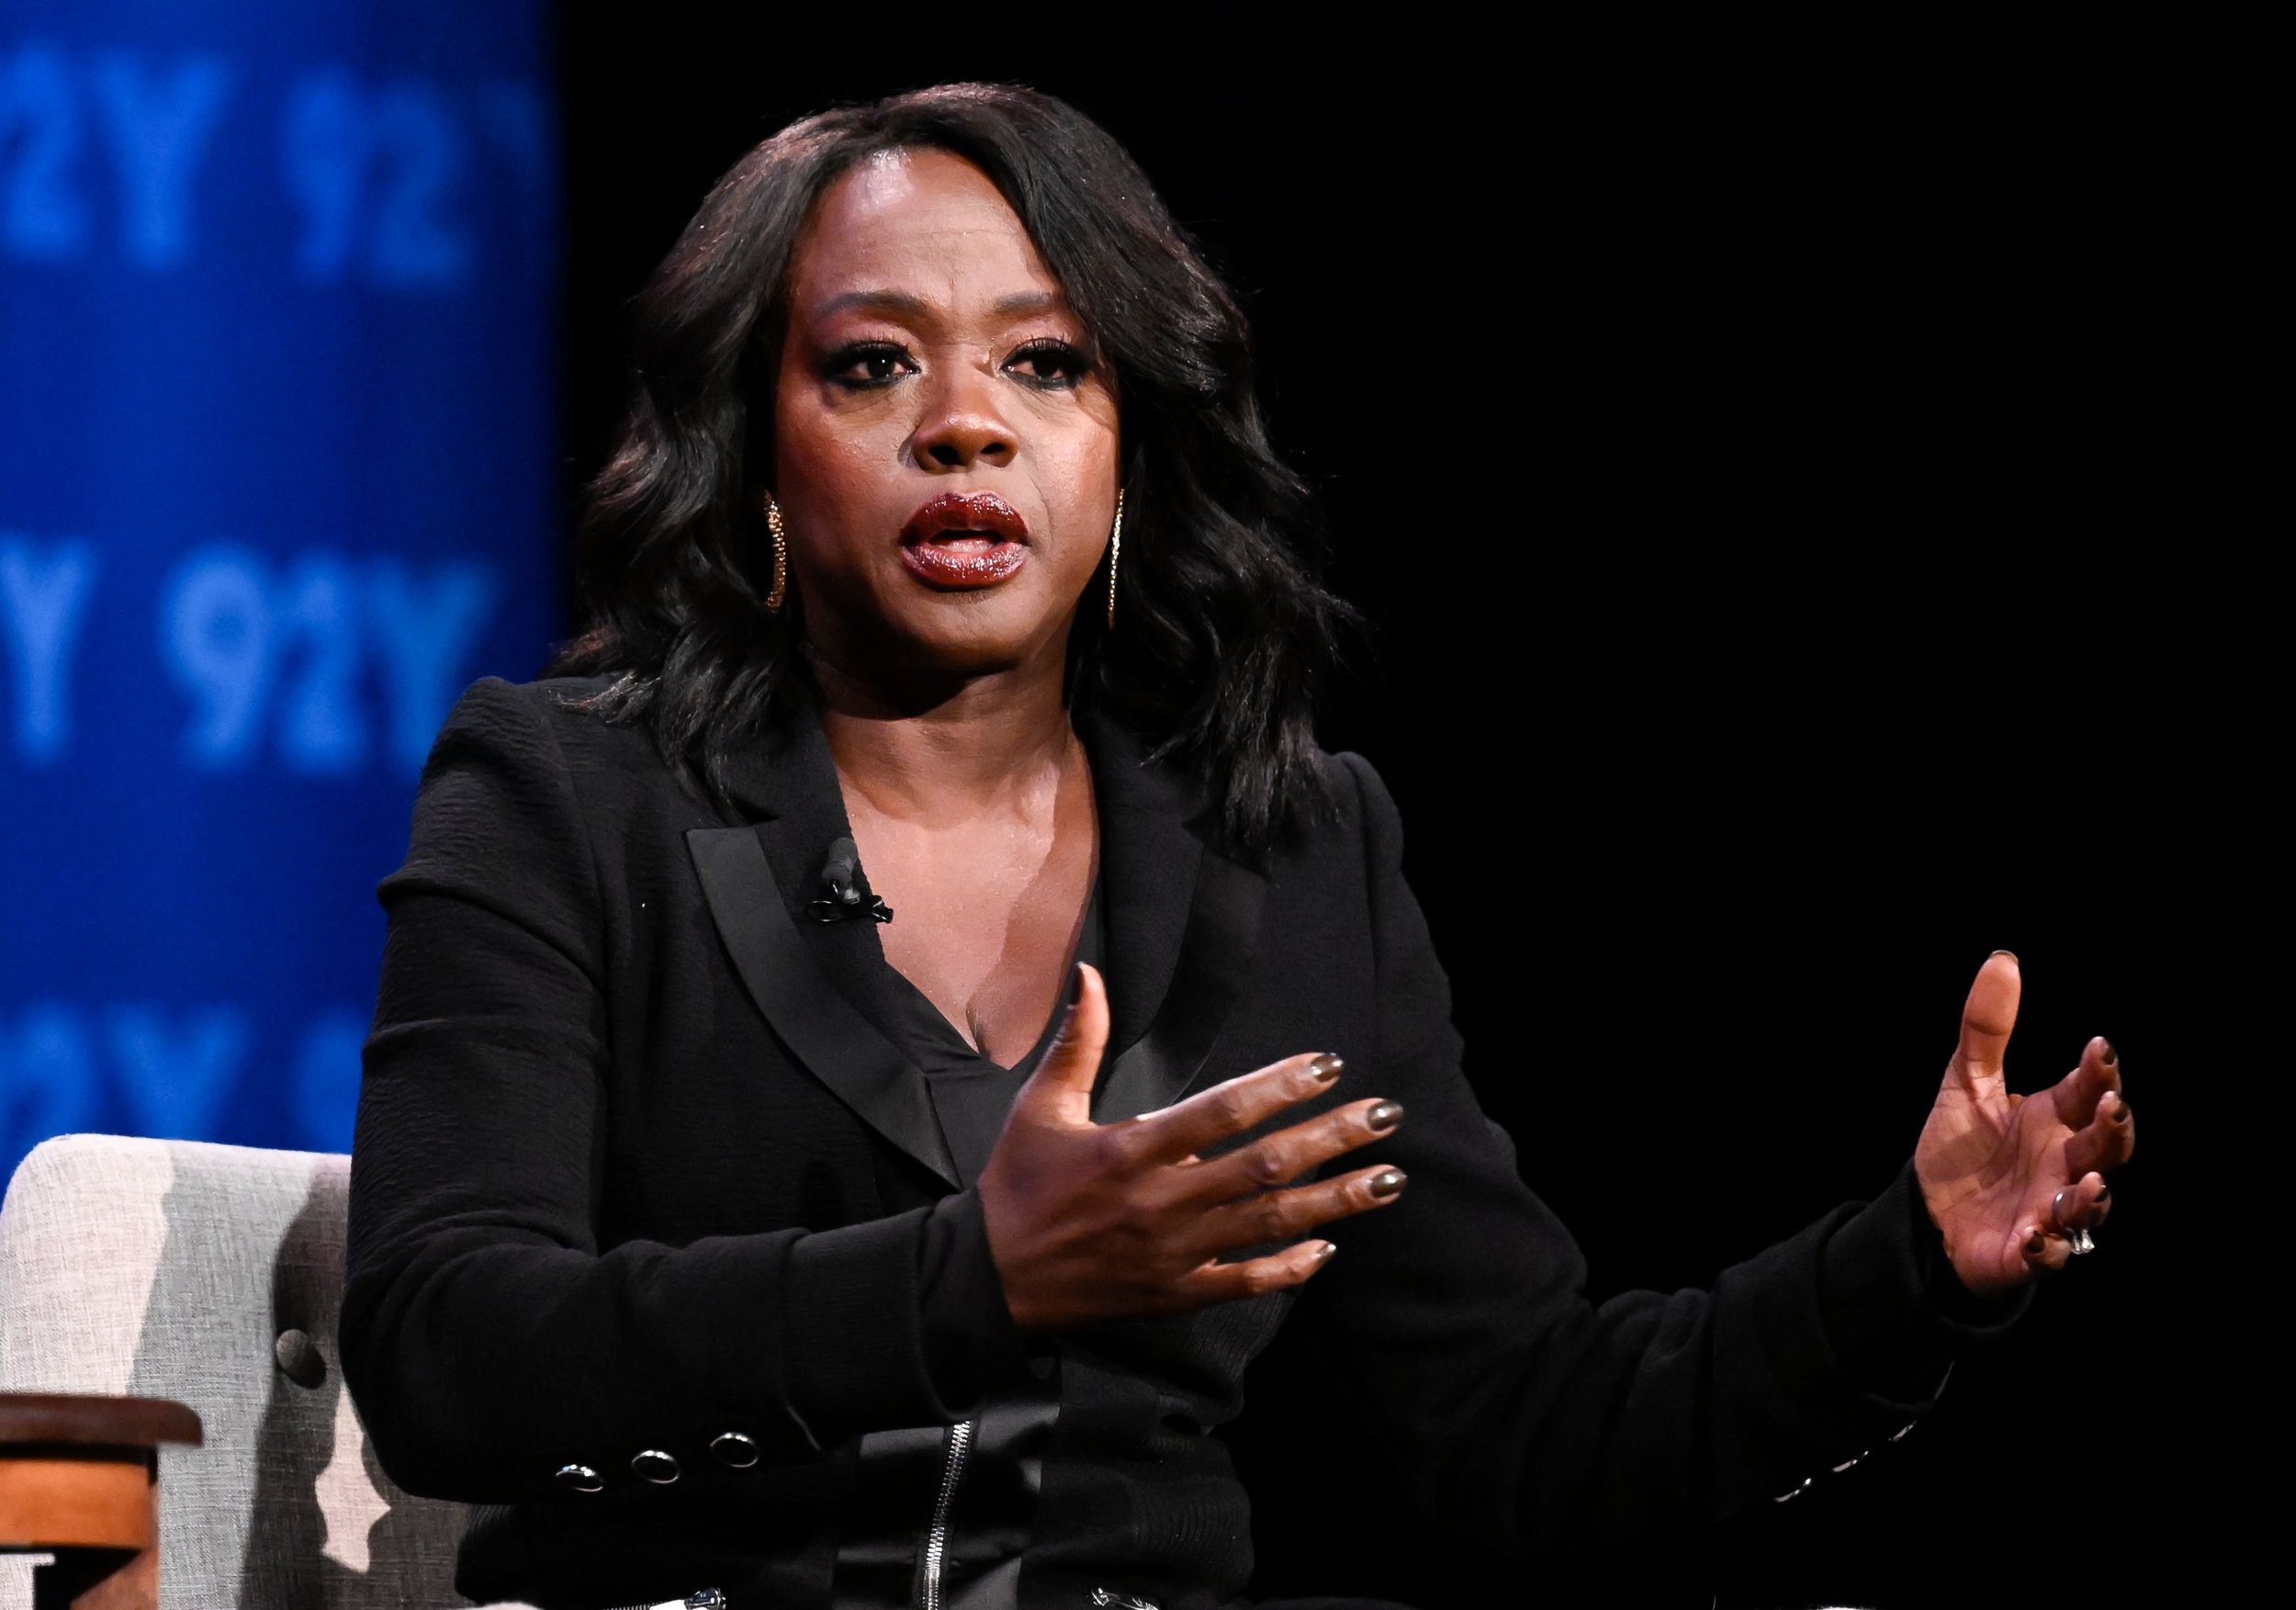 Viola Davis reveals the trauma that shaped her as an actress